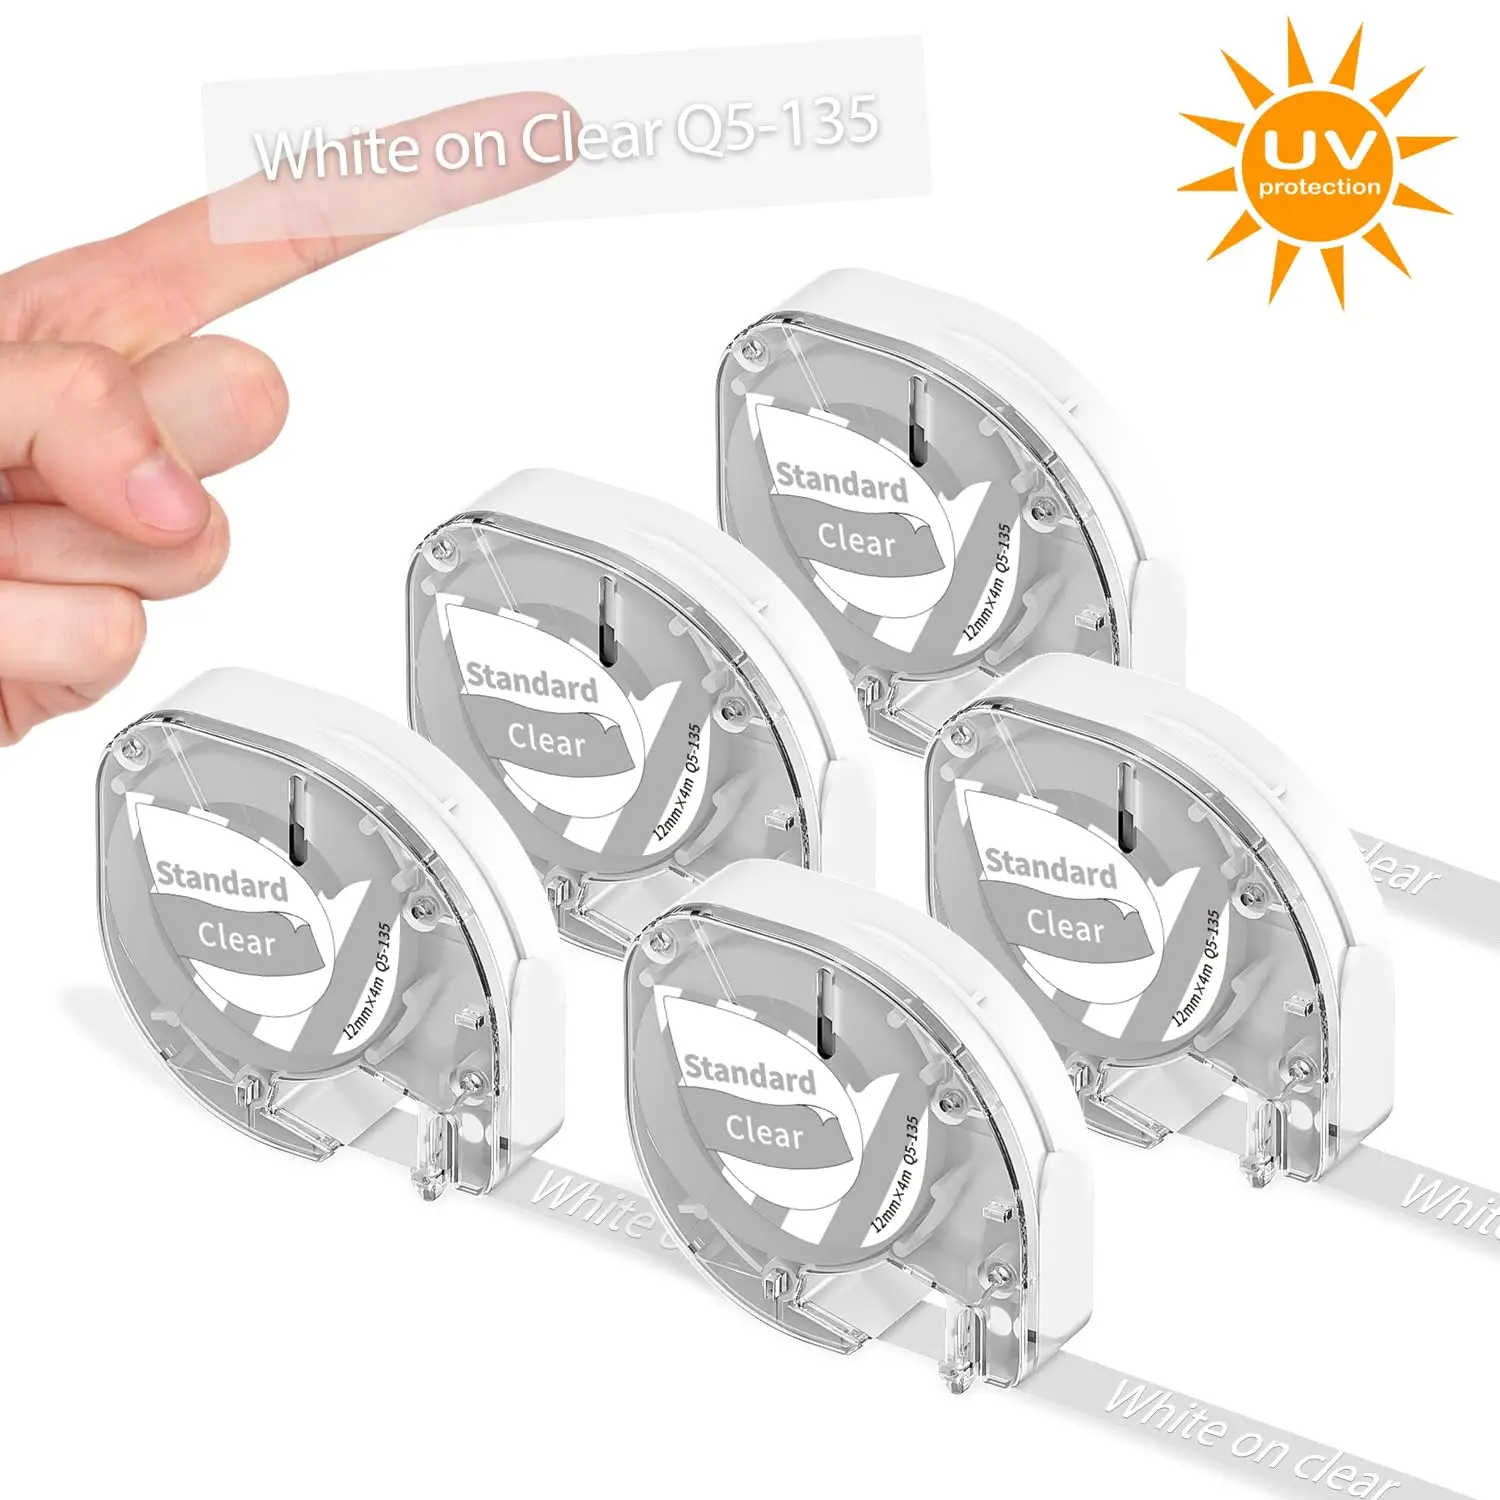 1-5packs for Phomemo P12 P12-Pro Label Maker Label Tape 12mmx4m Q5-135 White on Clear Labels Compatible Dymo Label Maker Refills